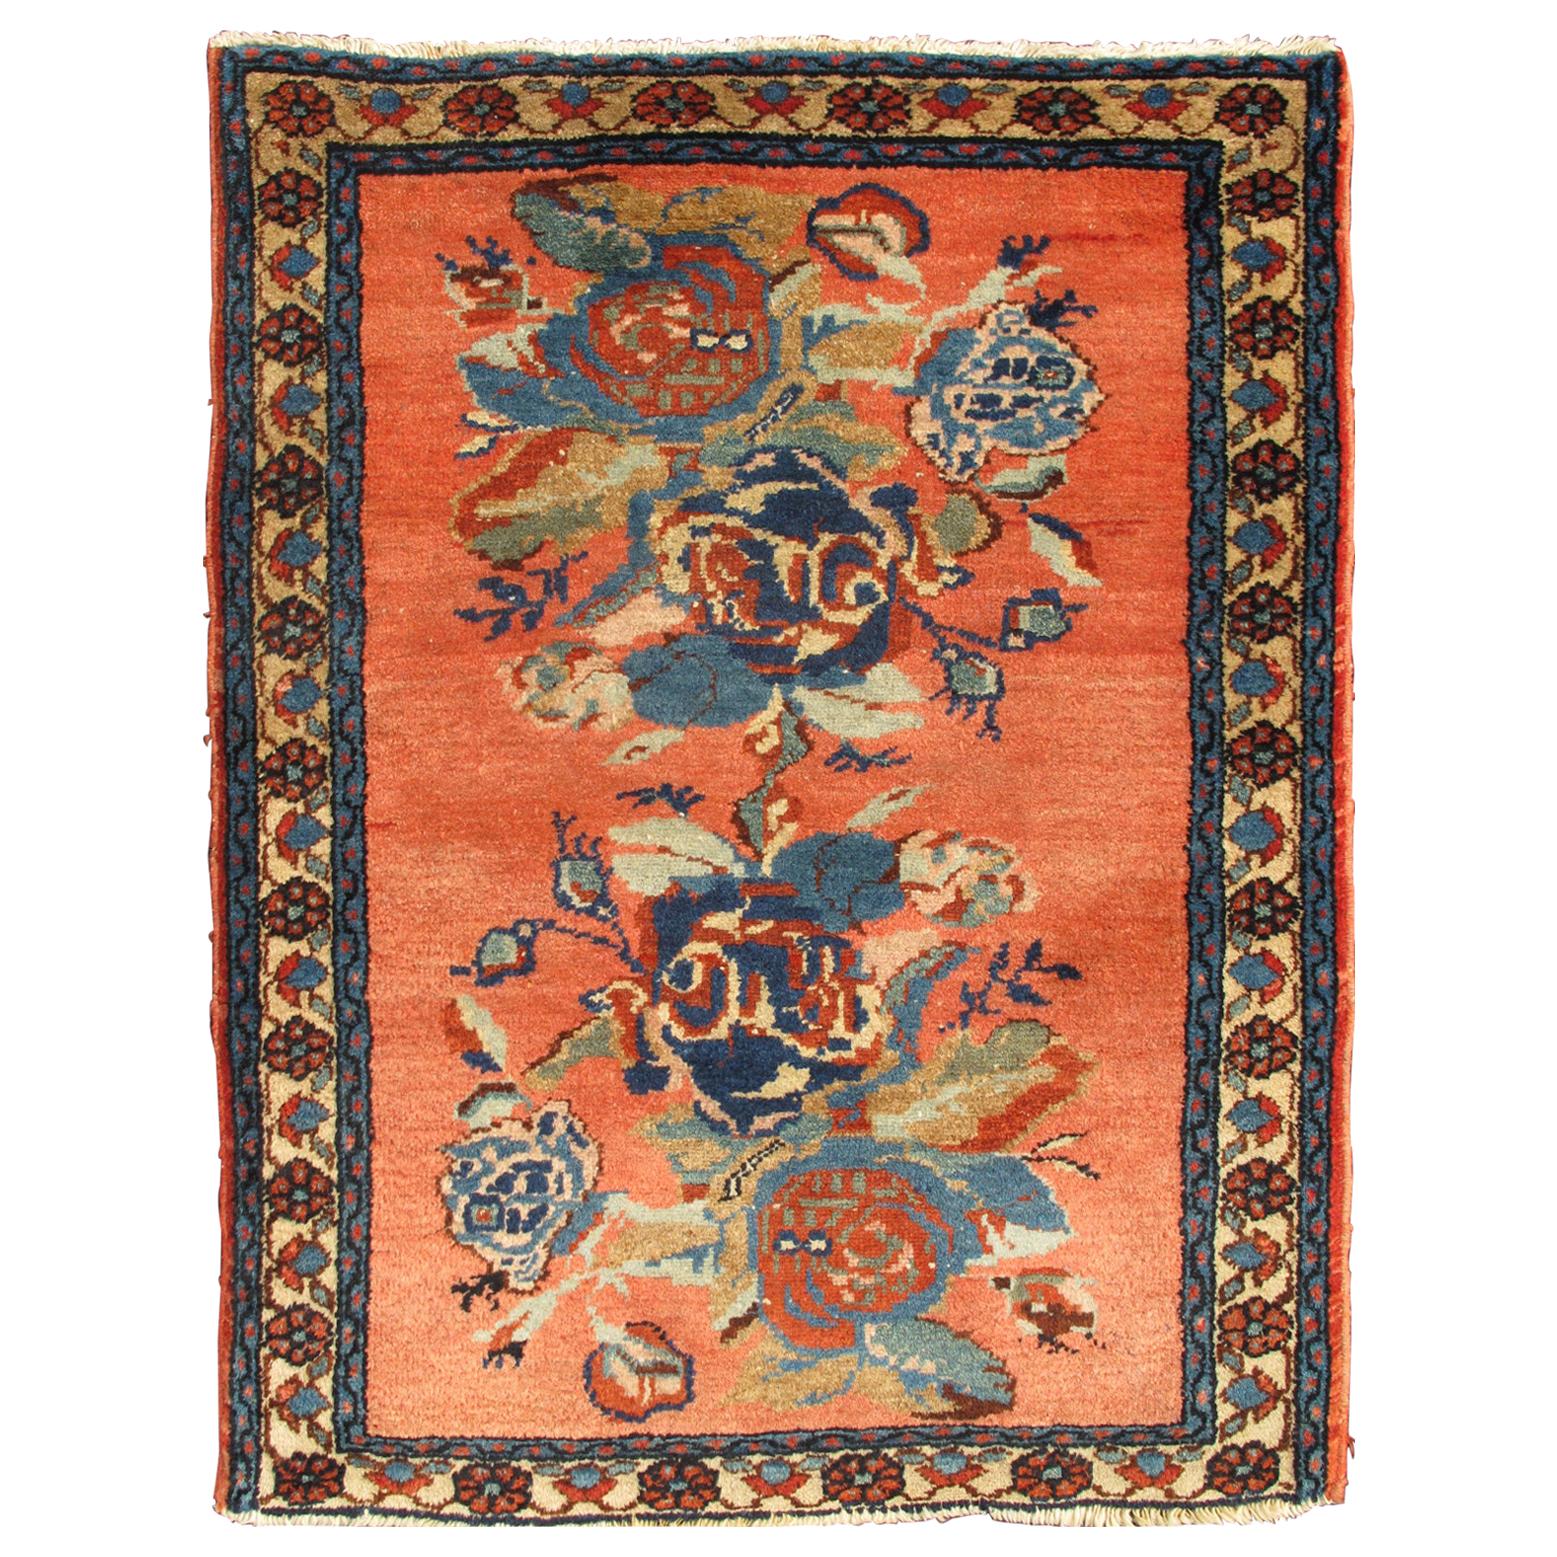 Finely Woven Antique Bakhtiar Small Carpet with Bouquets of Flowers and Salmon